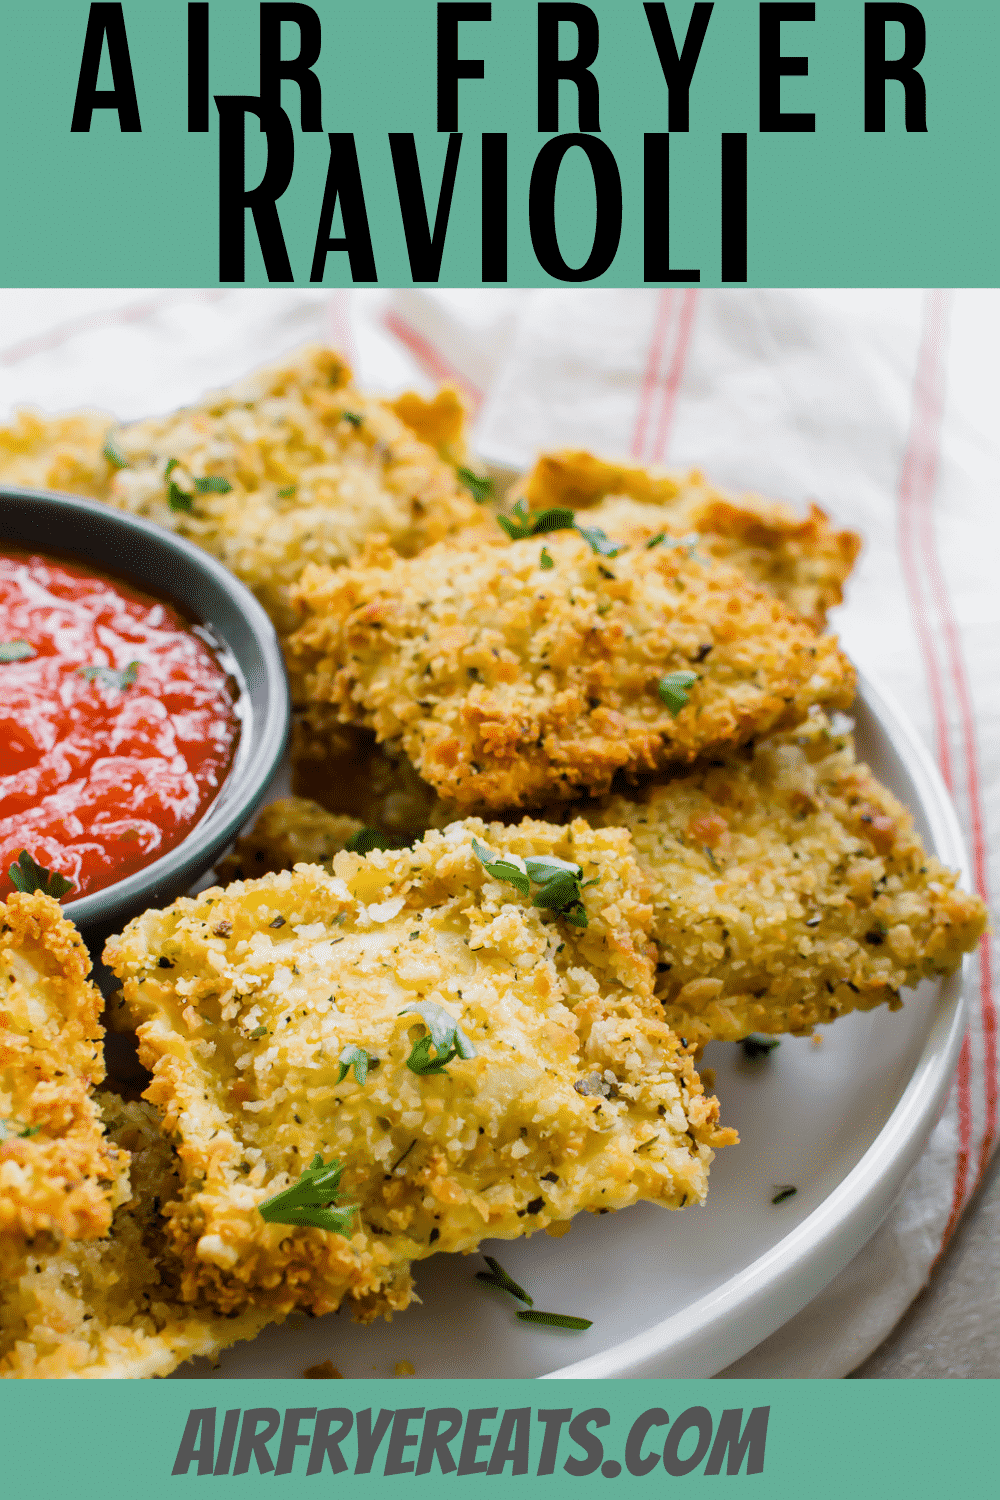 Turn frozen ravioli into a work of art with this simple method for making air fryer ravioli. These ravioli are crispy, cheesy, and irresistible with a side of marinara sauce. #airfryer #toastedravioli via @vegetarianmamma